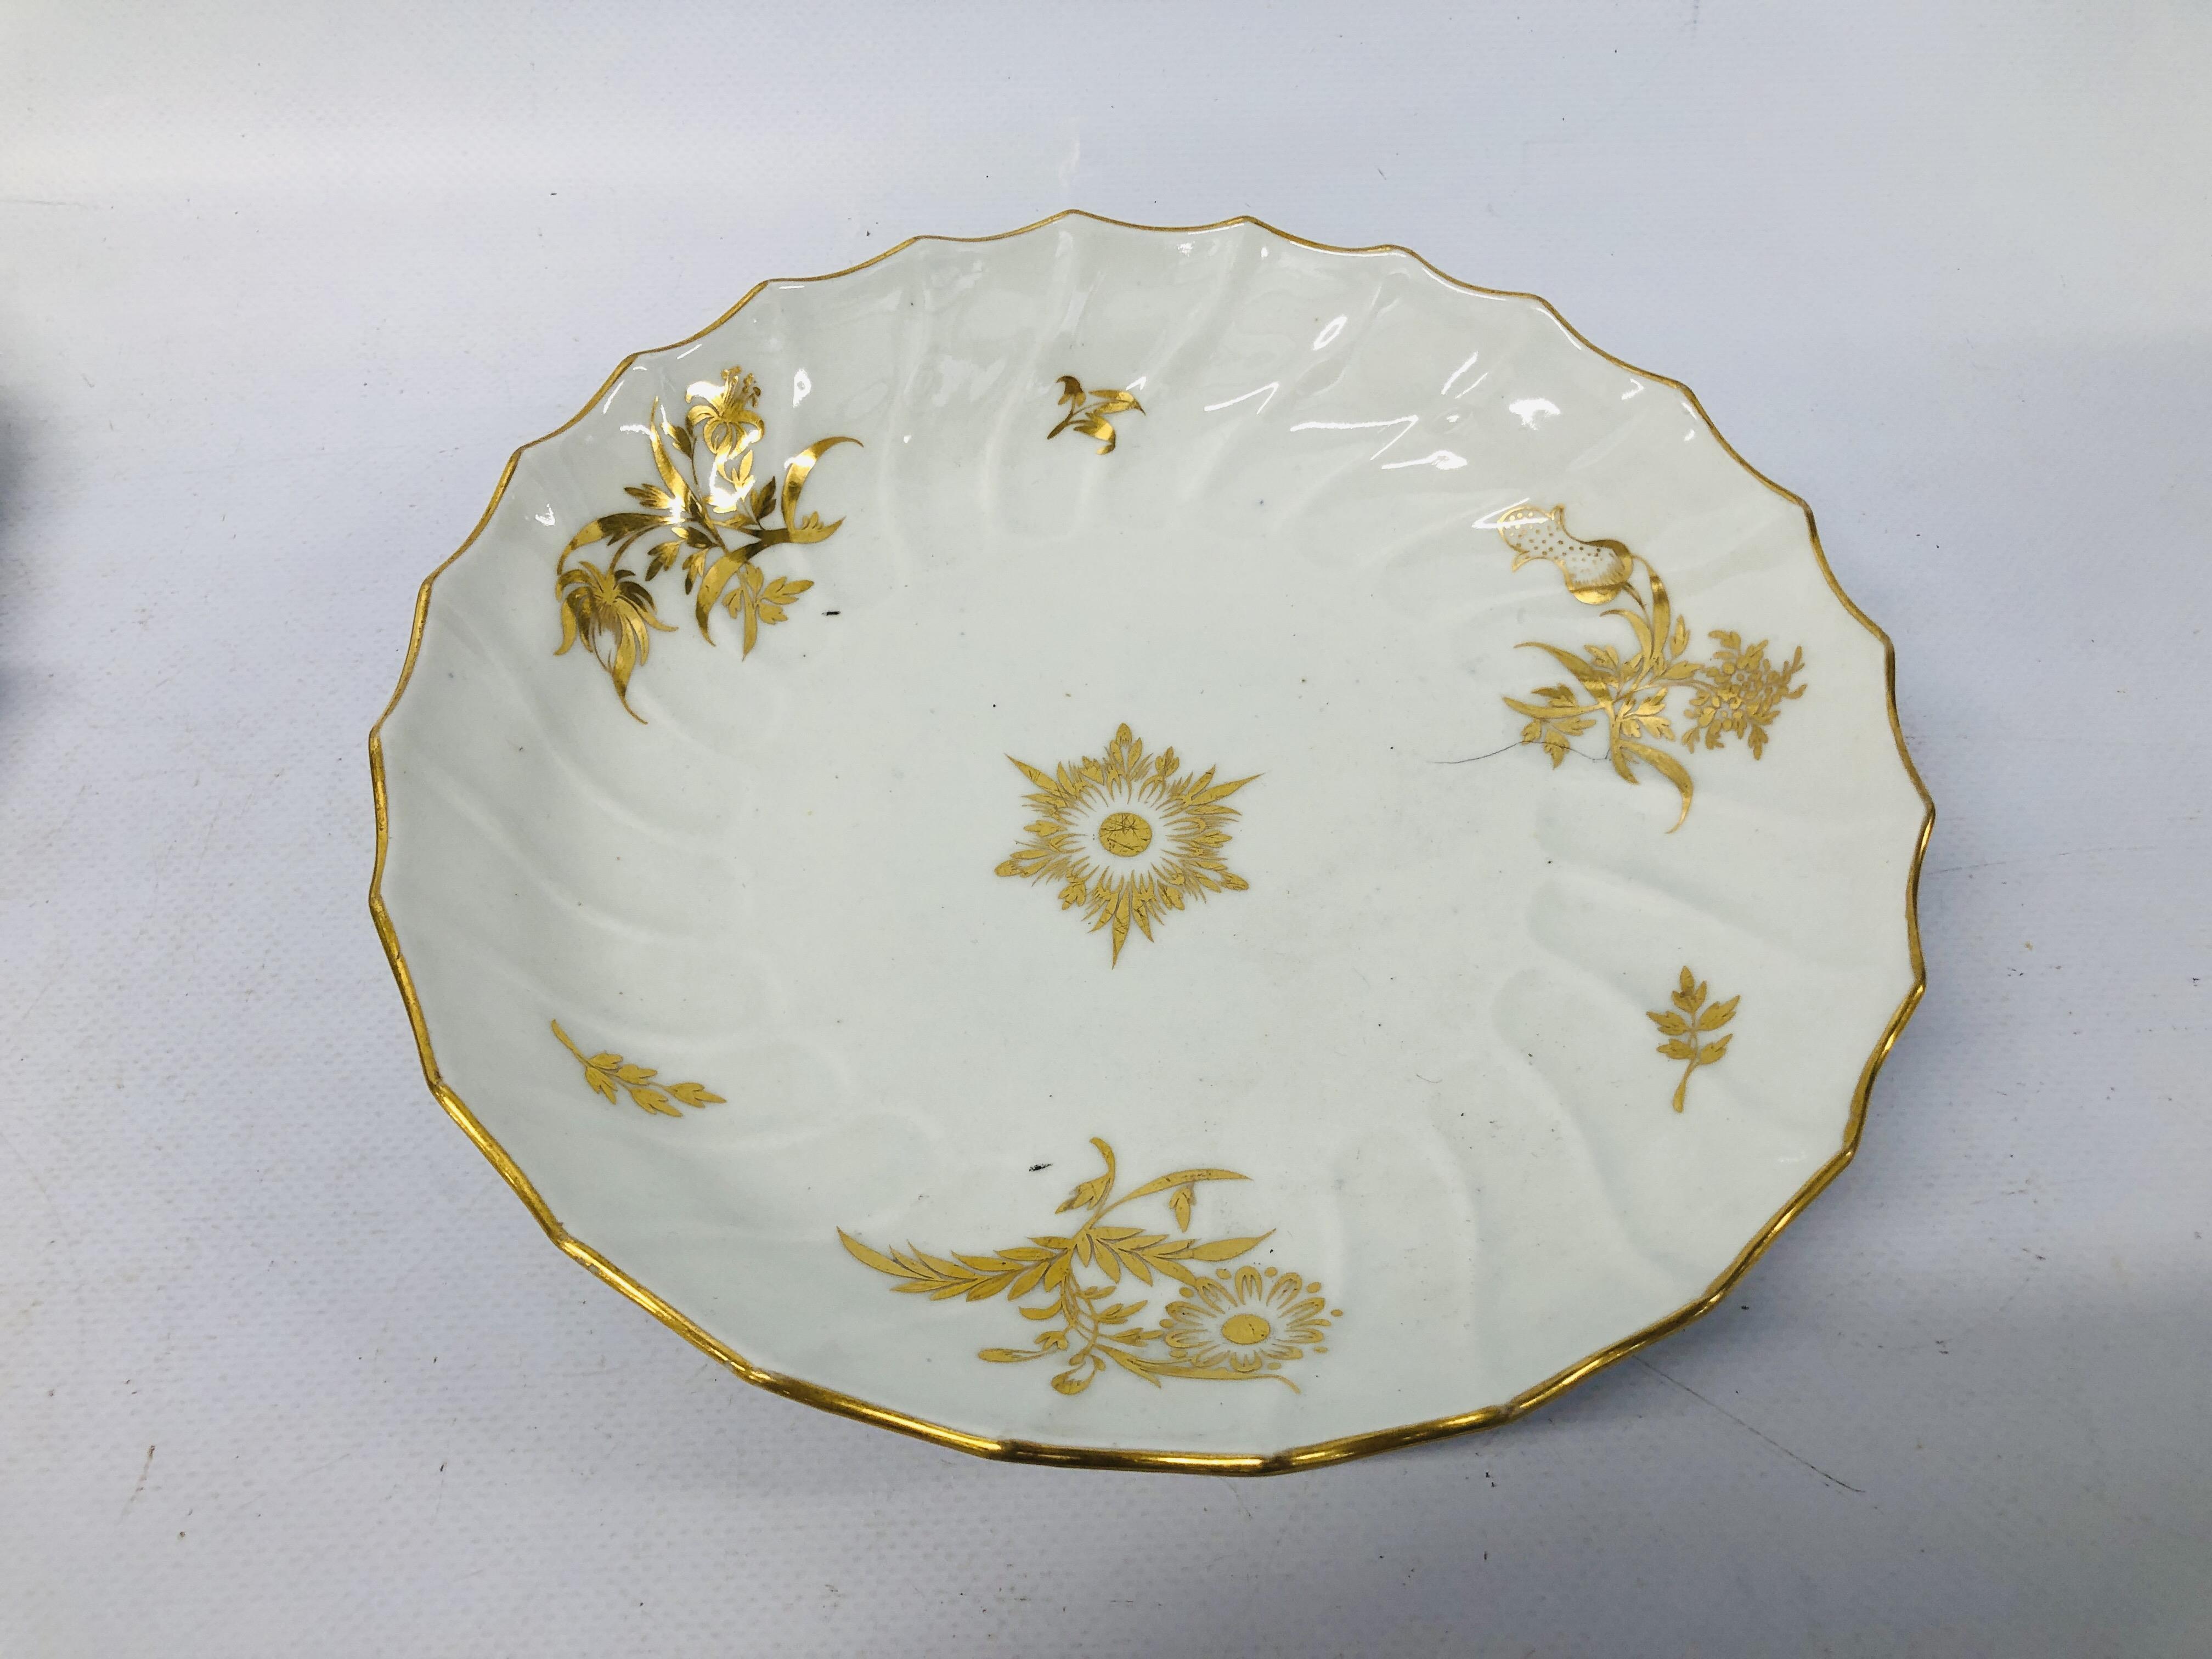 COLLECTION OF PERIOD PLATES TO INCLUDE A SET OF 4 HANDPAINTED FLORAL PATTERN PLATES "3090", - Image 13 of 17